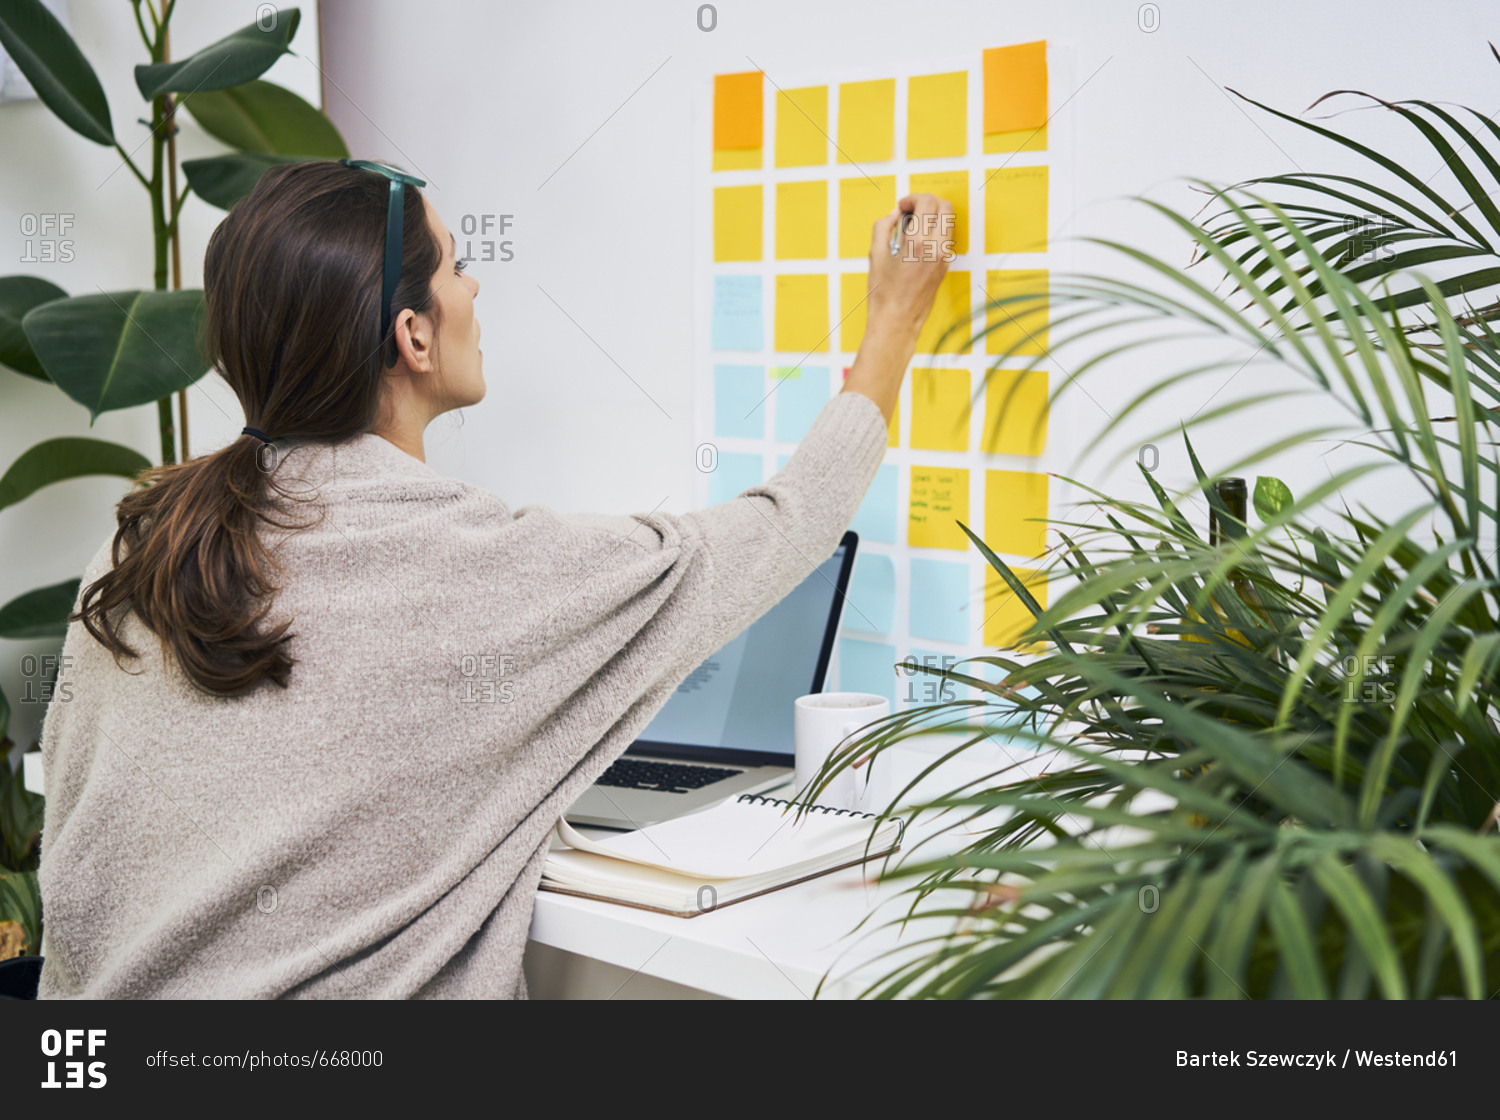 Young woman with laptop on desk working with adhesive notes on the wall